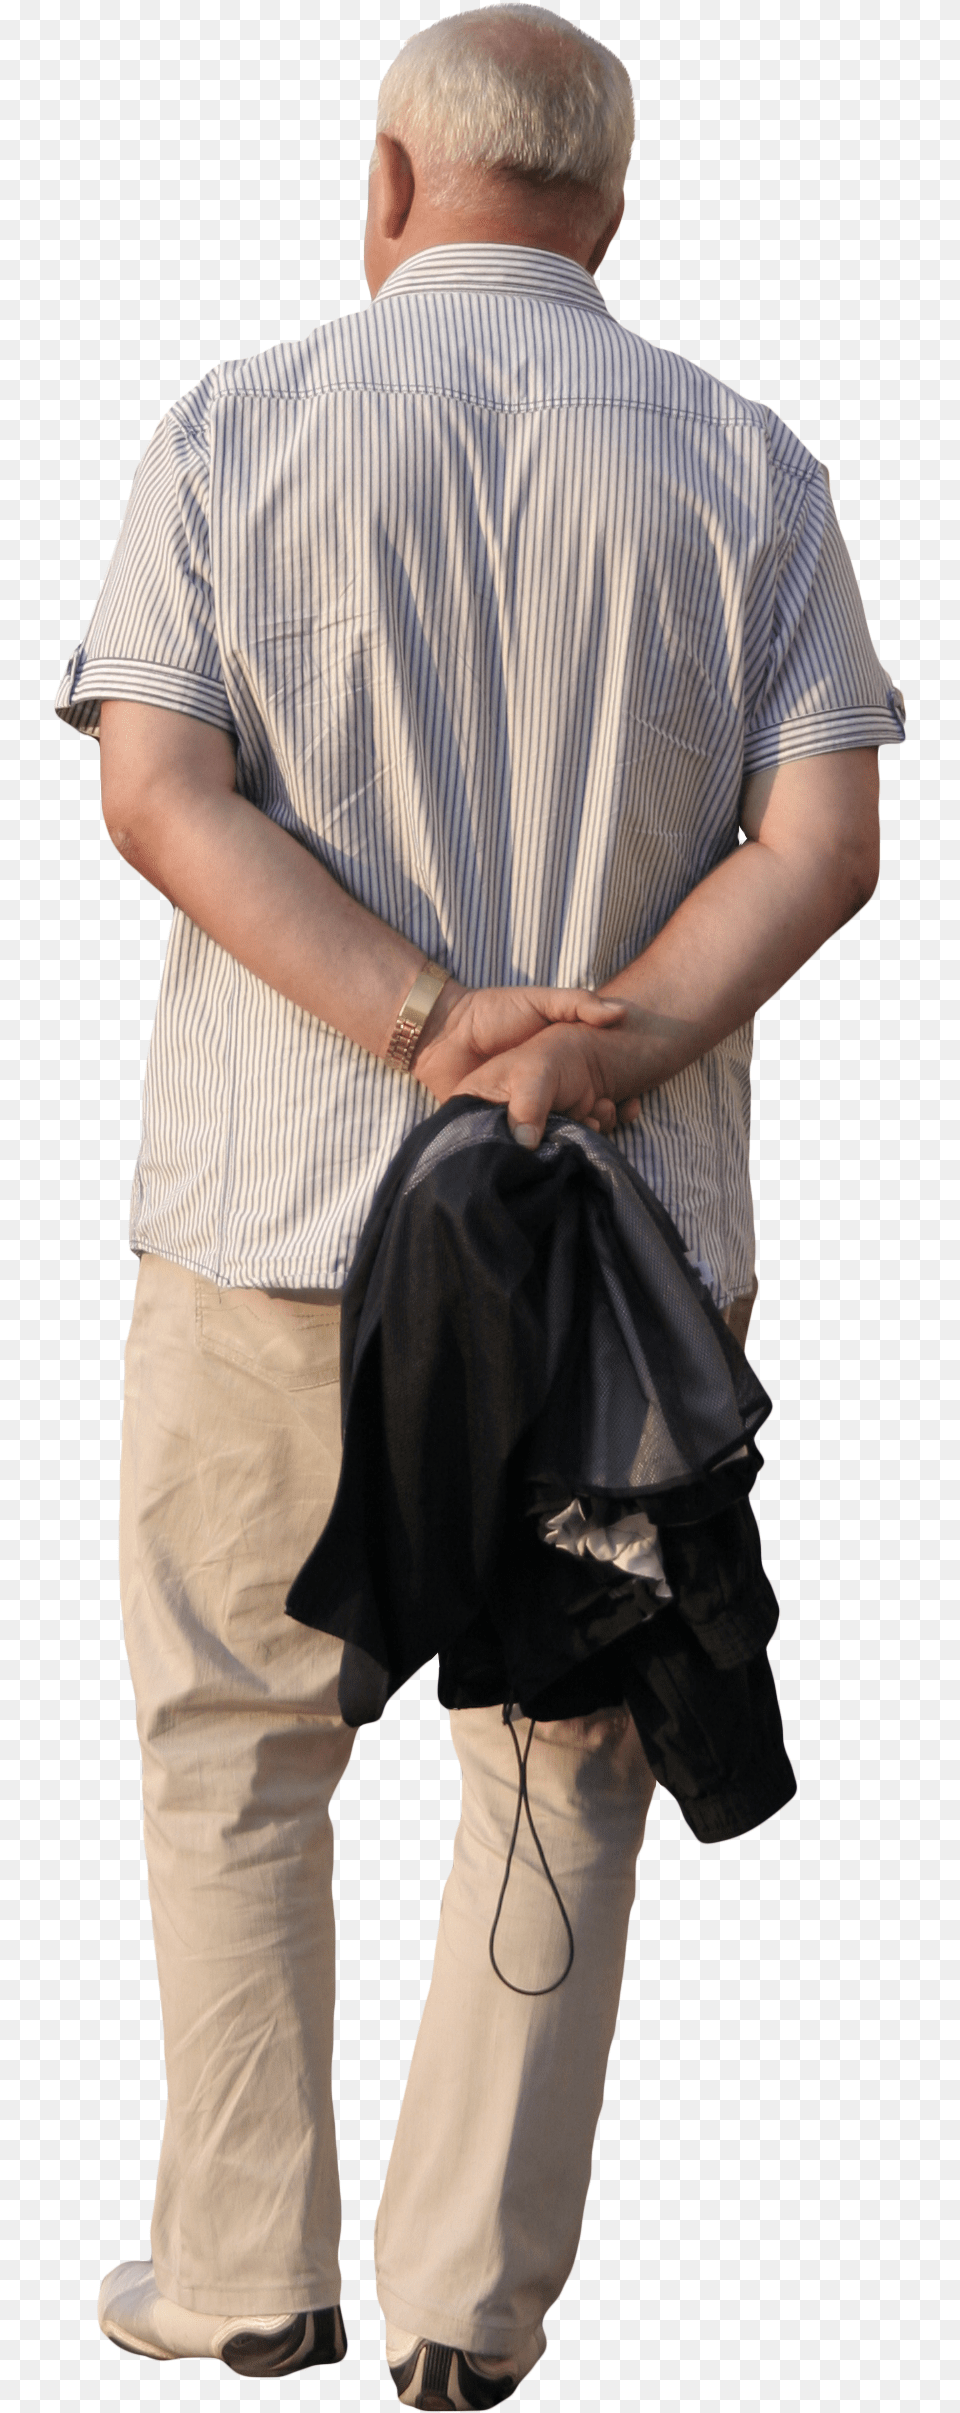 People Pluspngm Old Man Images Old Man Cut Out, Male, Pants, Person, Clothing Png Image